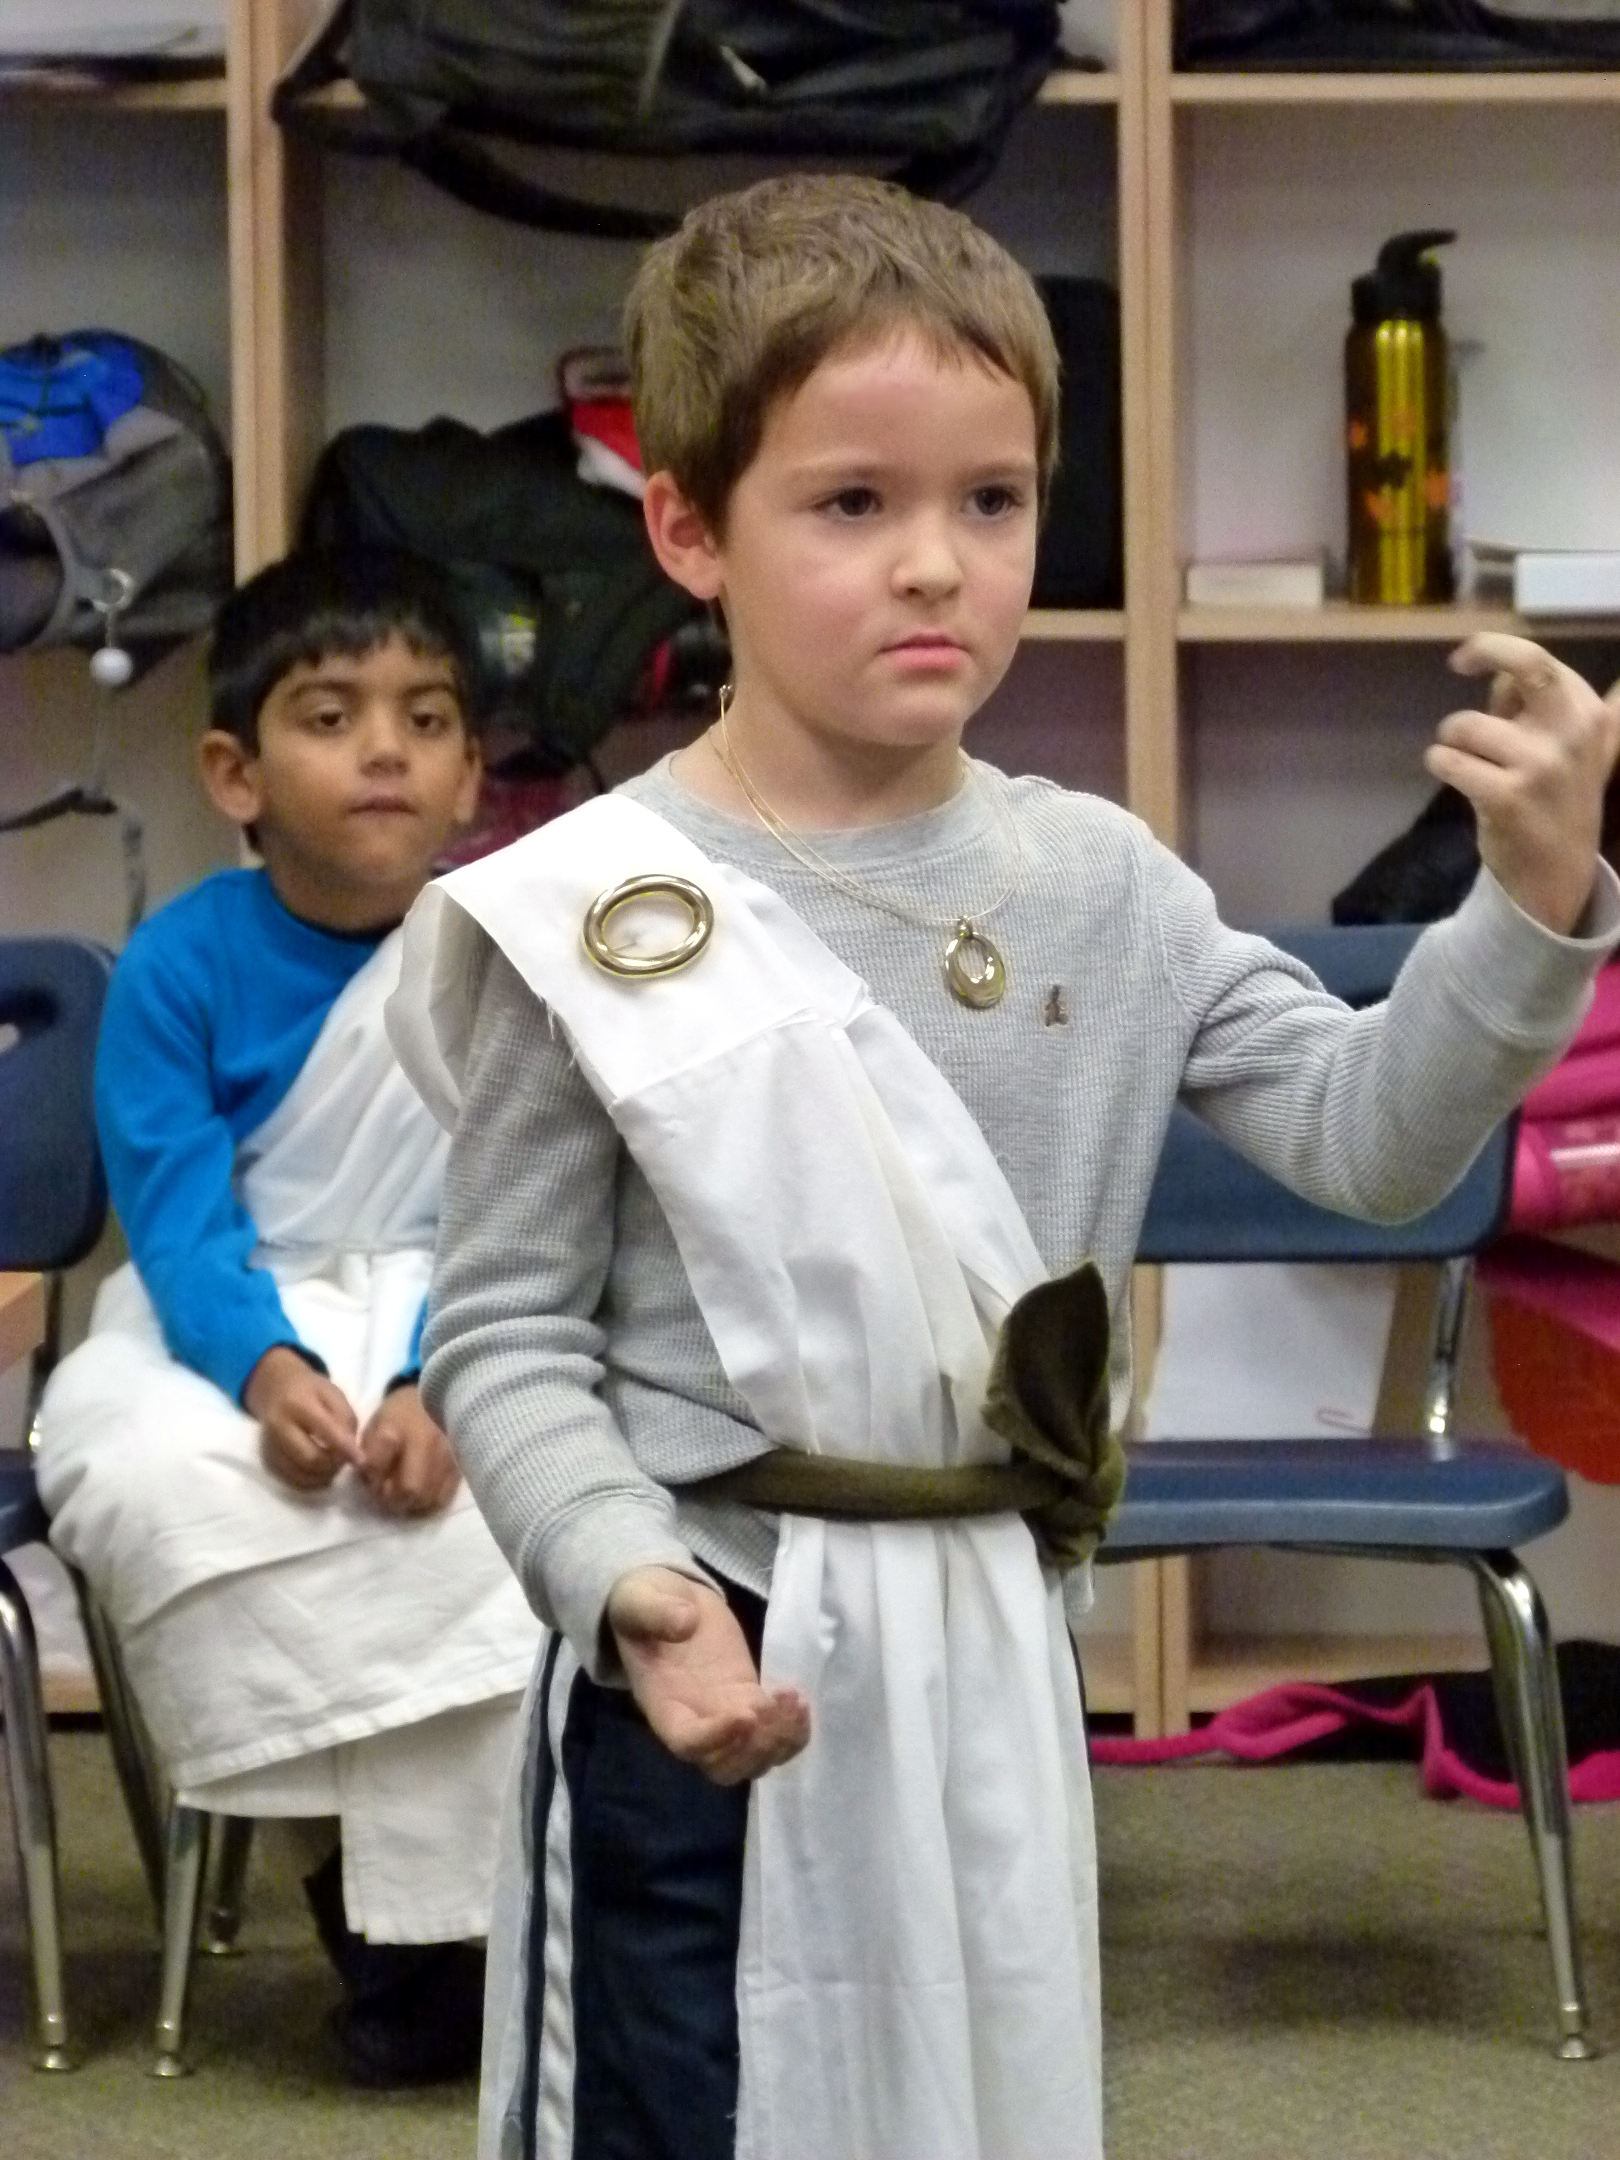 One of Primoris Academy's students showing off Roman attire during the "Rome Day" fashion show.